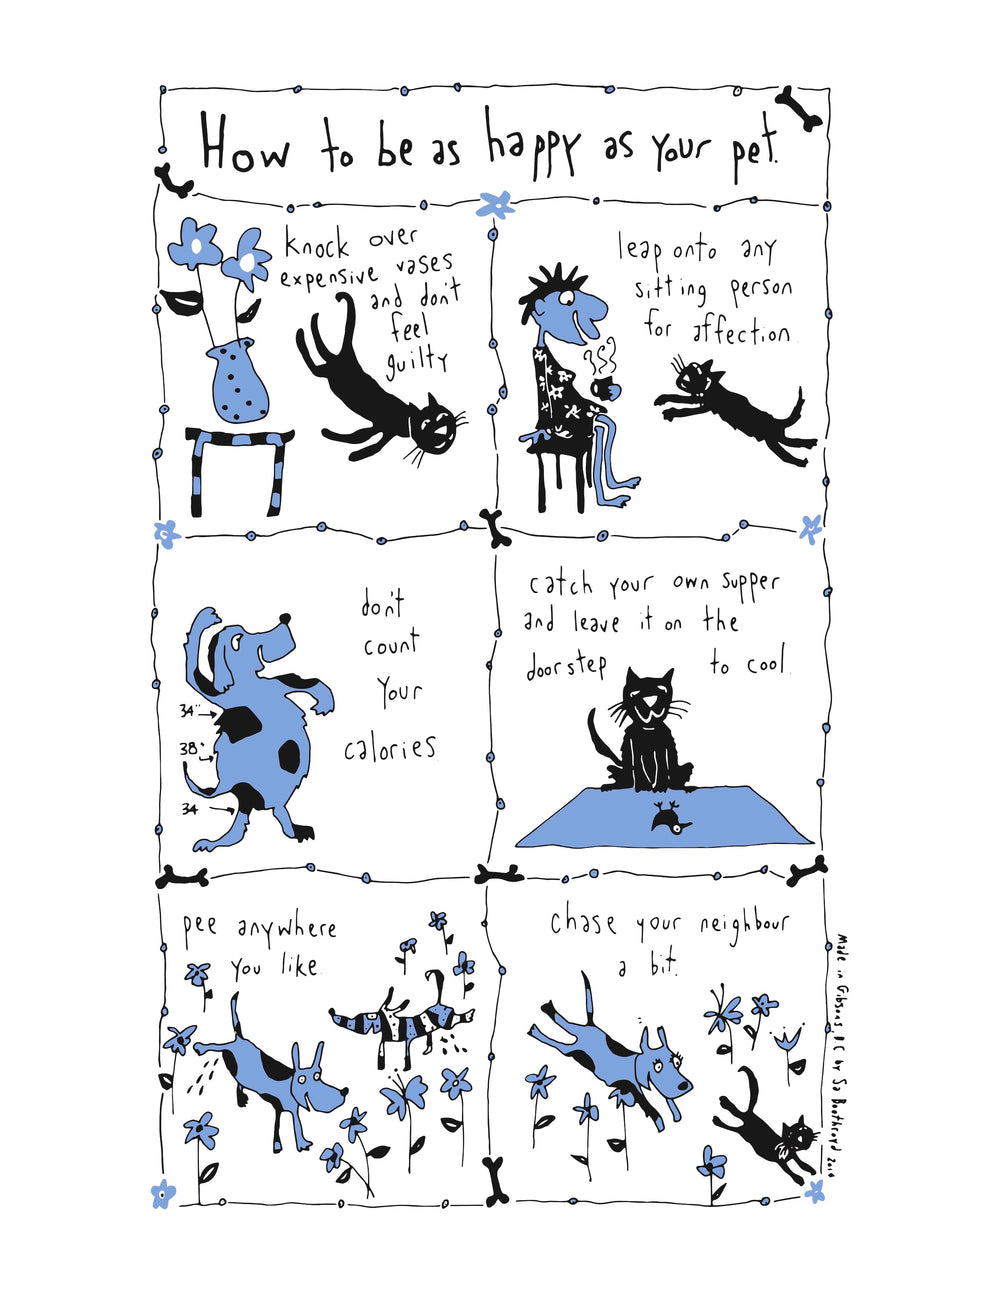 Print - How to be as happy as your pet